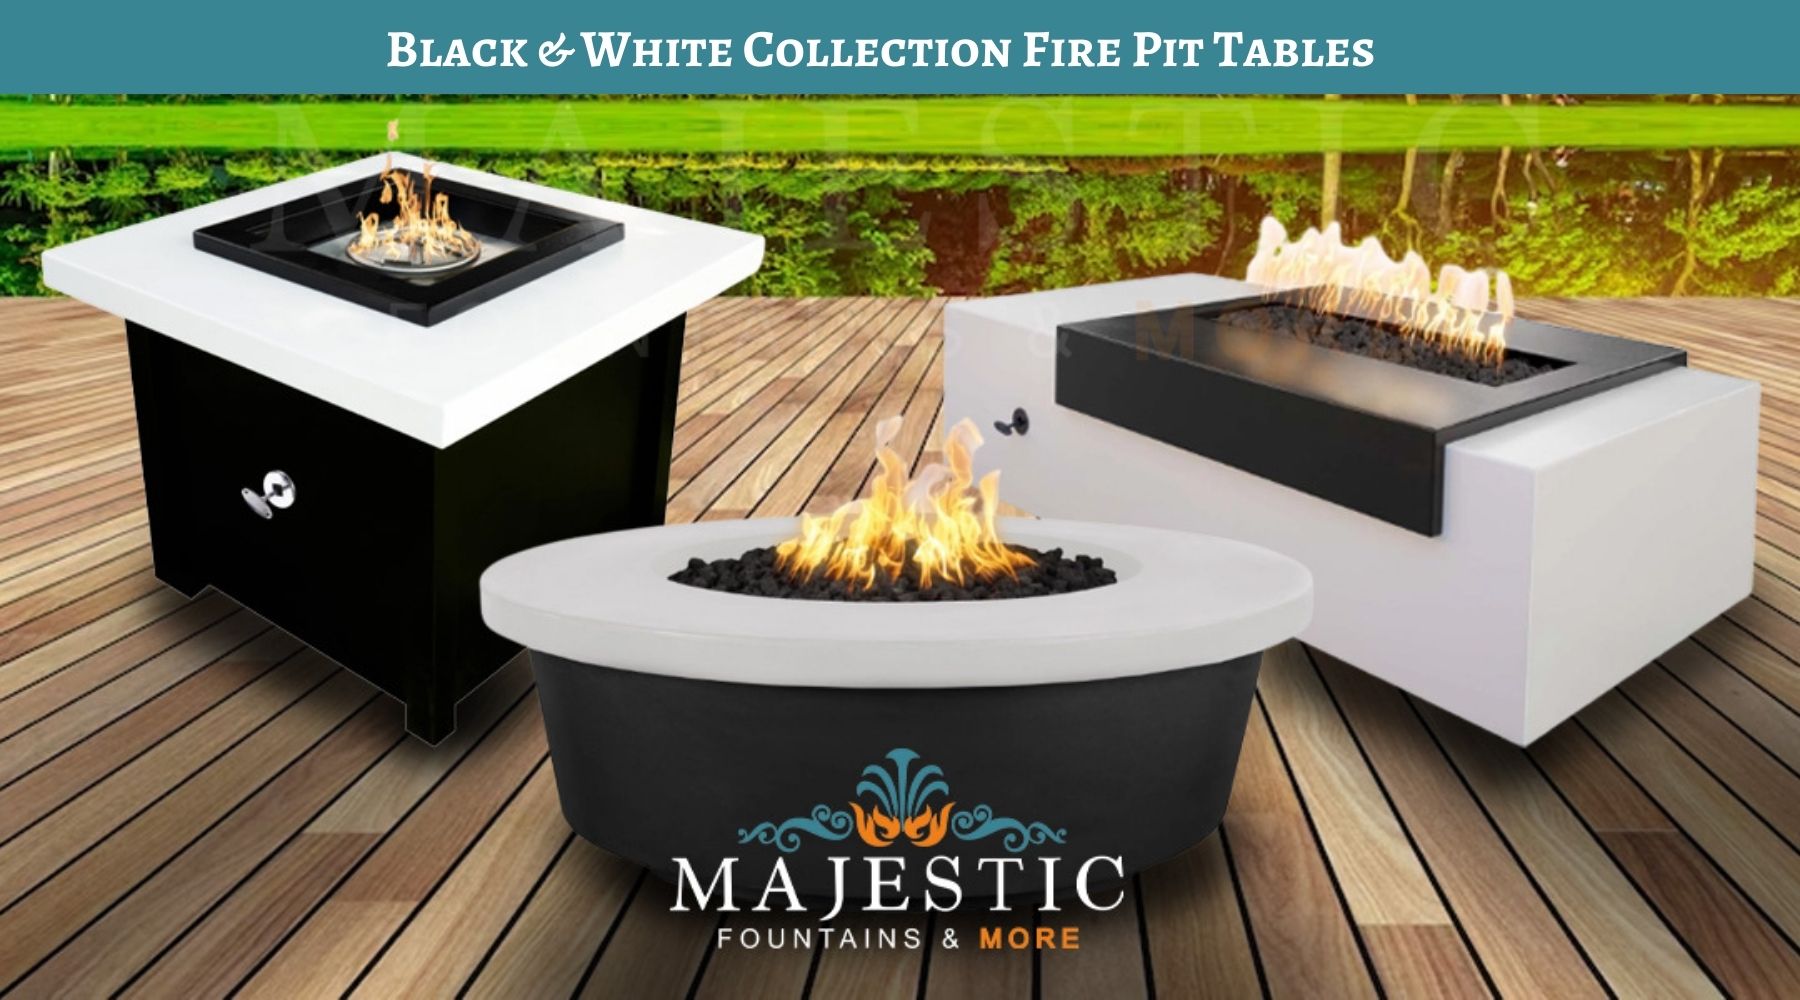 The Aesthetic Black & White Collection Fire Pit Tables